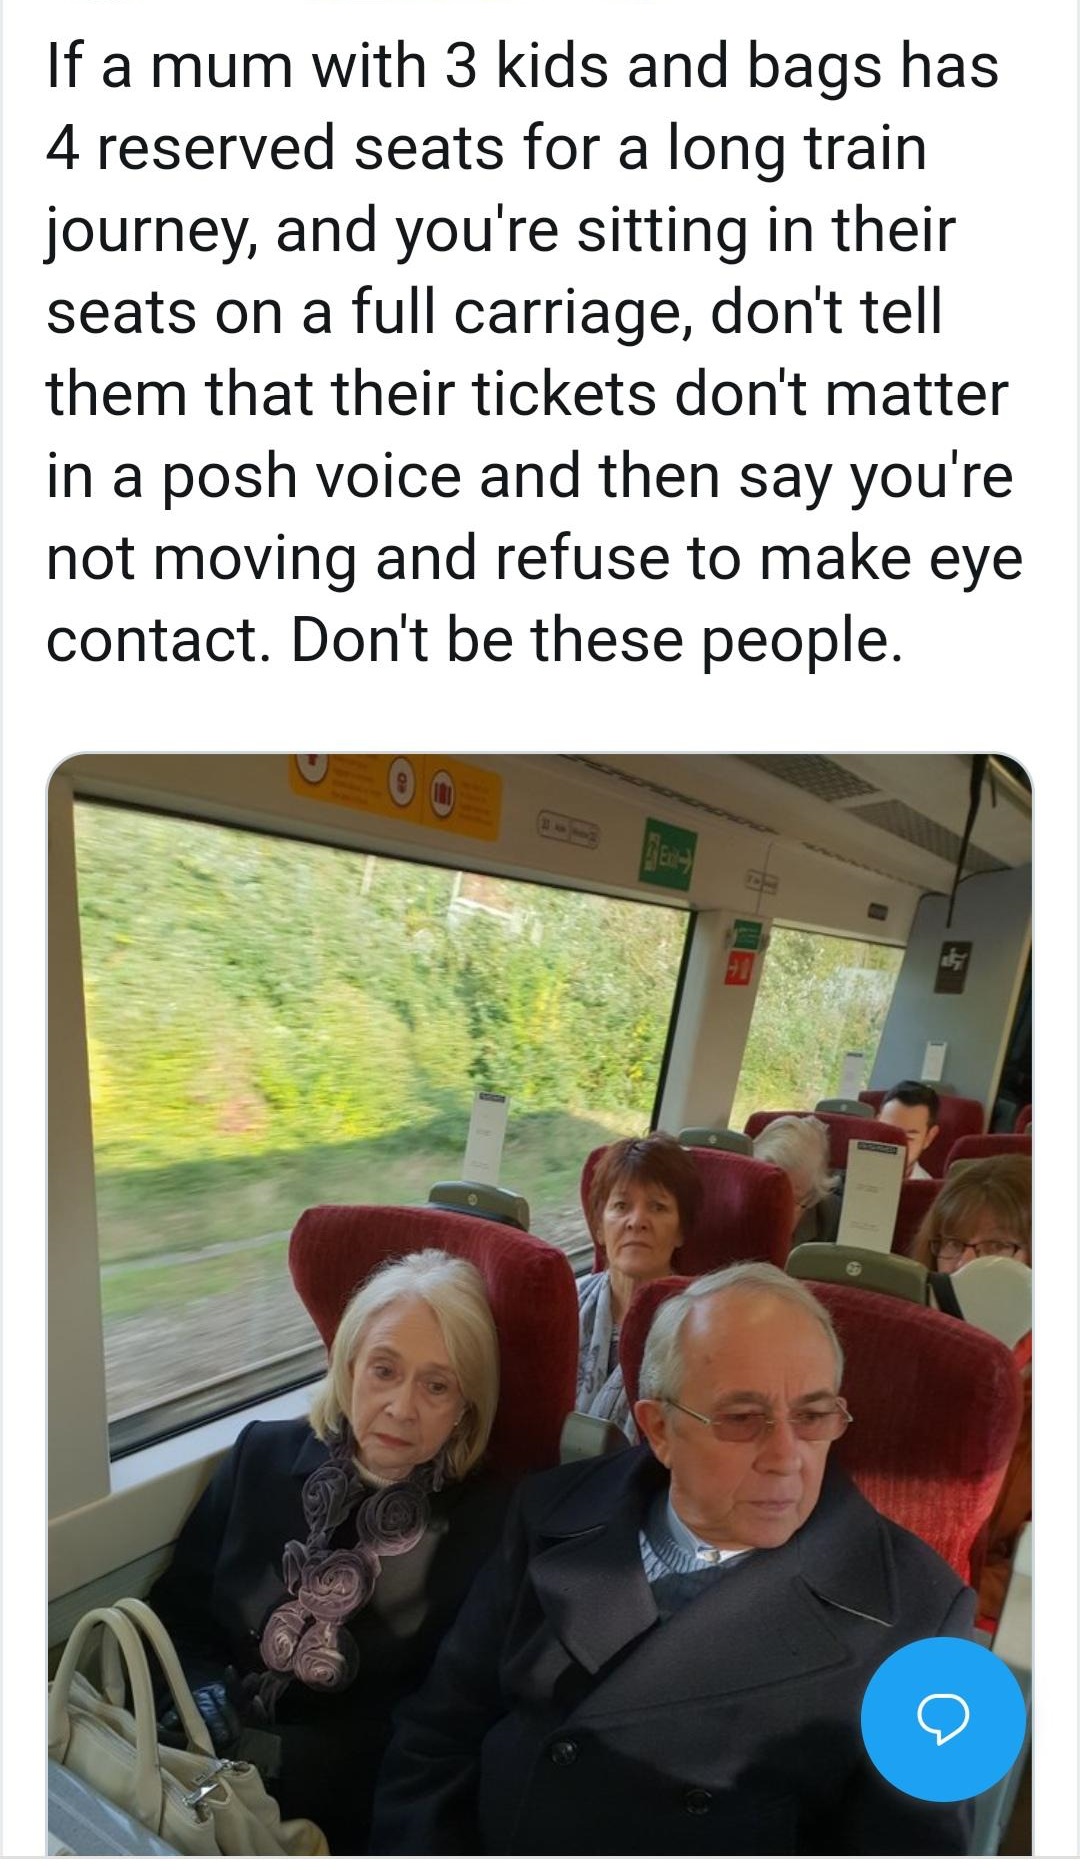 amanda mancino williams train - If a mum with 3 kids and bags has 4 reserved seats for a long train journey, and you're sitting in their seats on a full carriage, don't tell them that their tickets don't matter in a posh voice and then say you're not movi